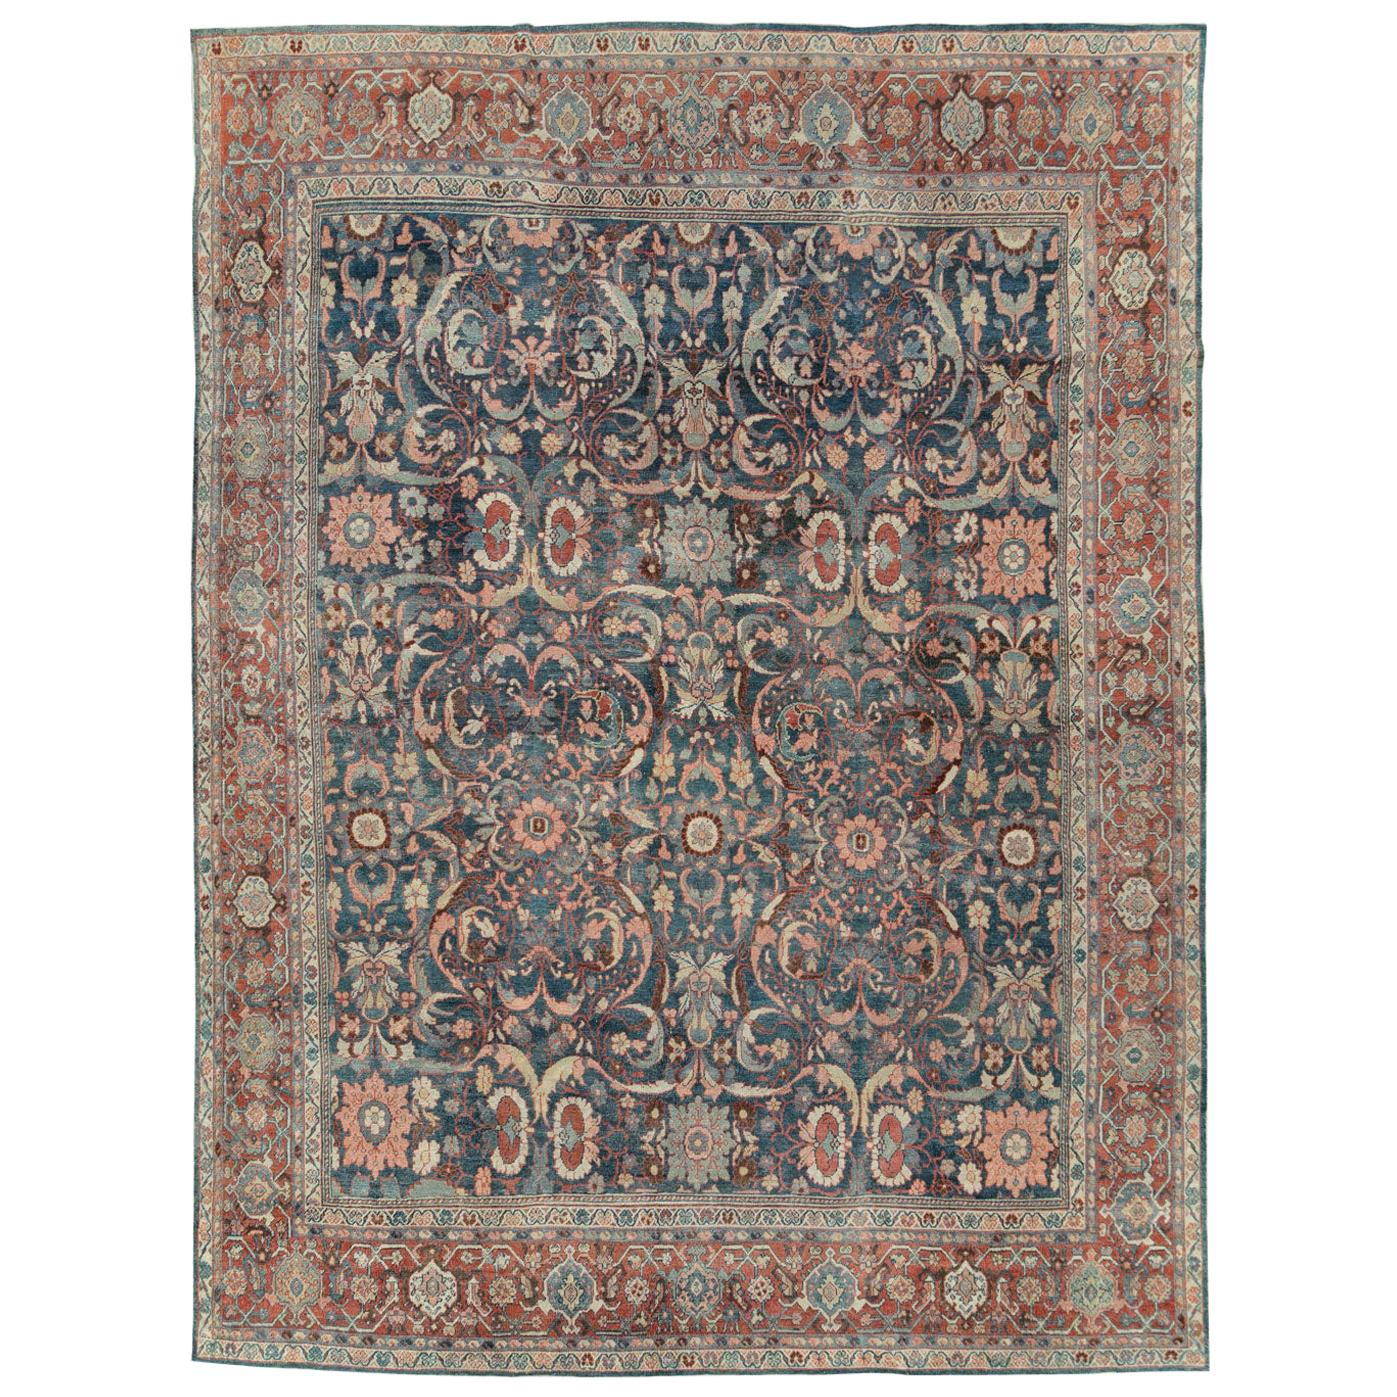 Early 20th Century Handmade Persian Mahal Room Size Carpet in Blue and Red For Sale